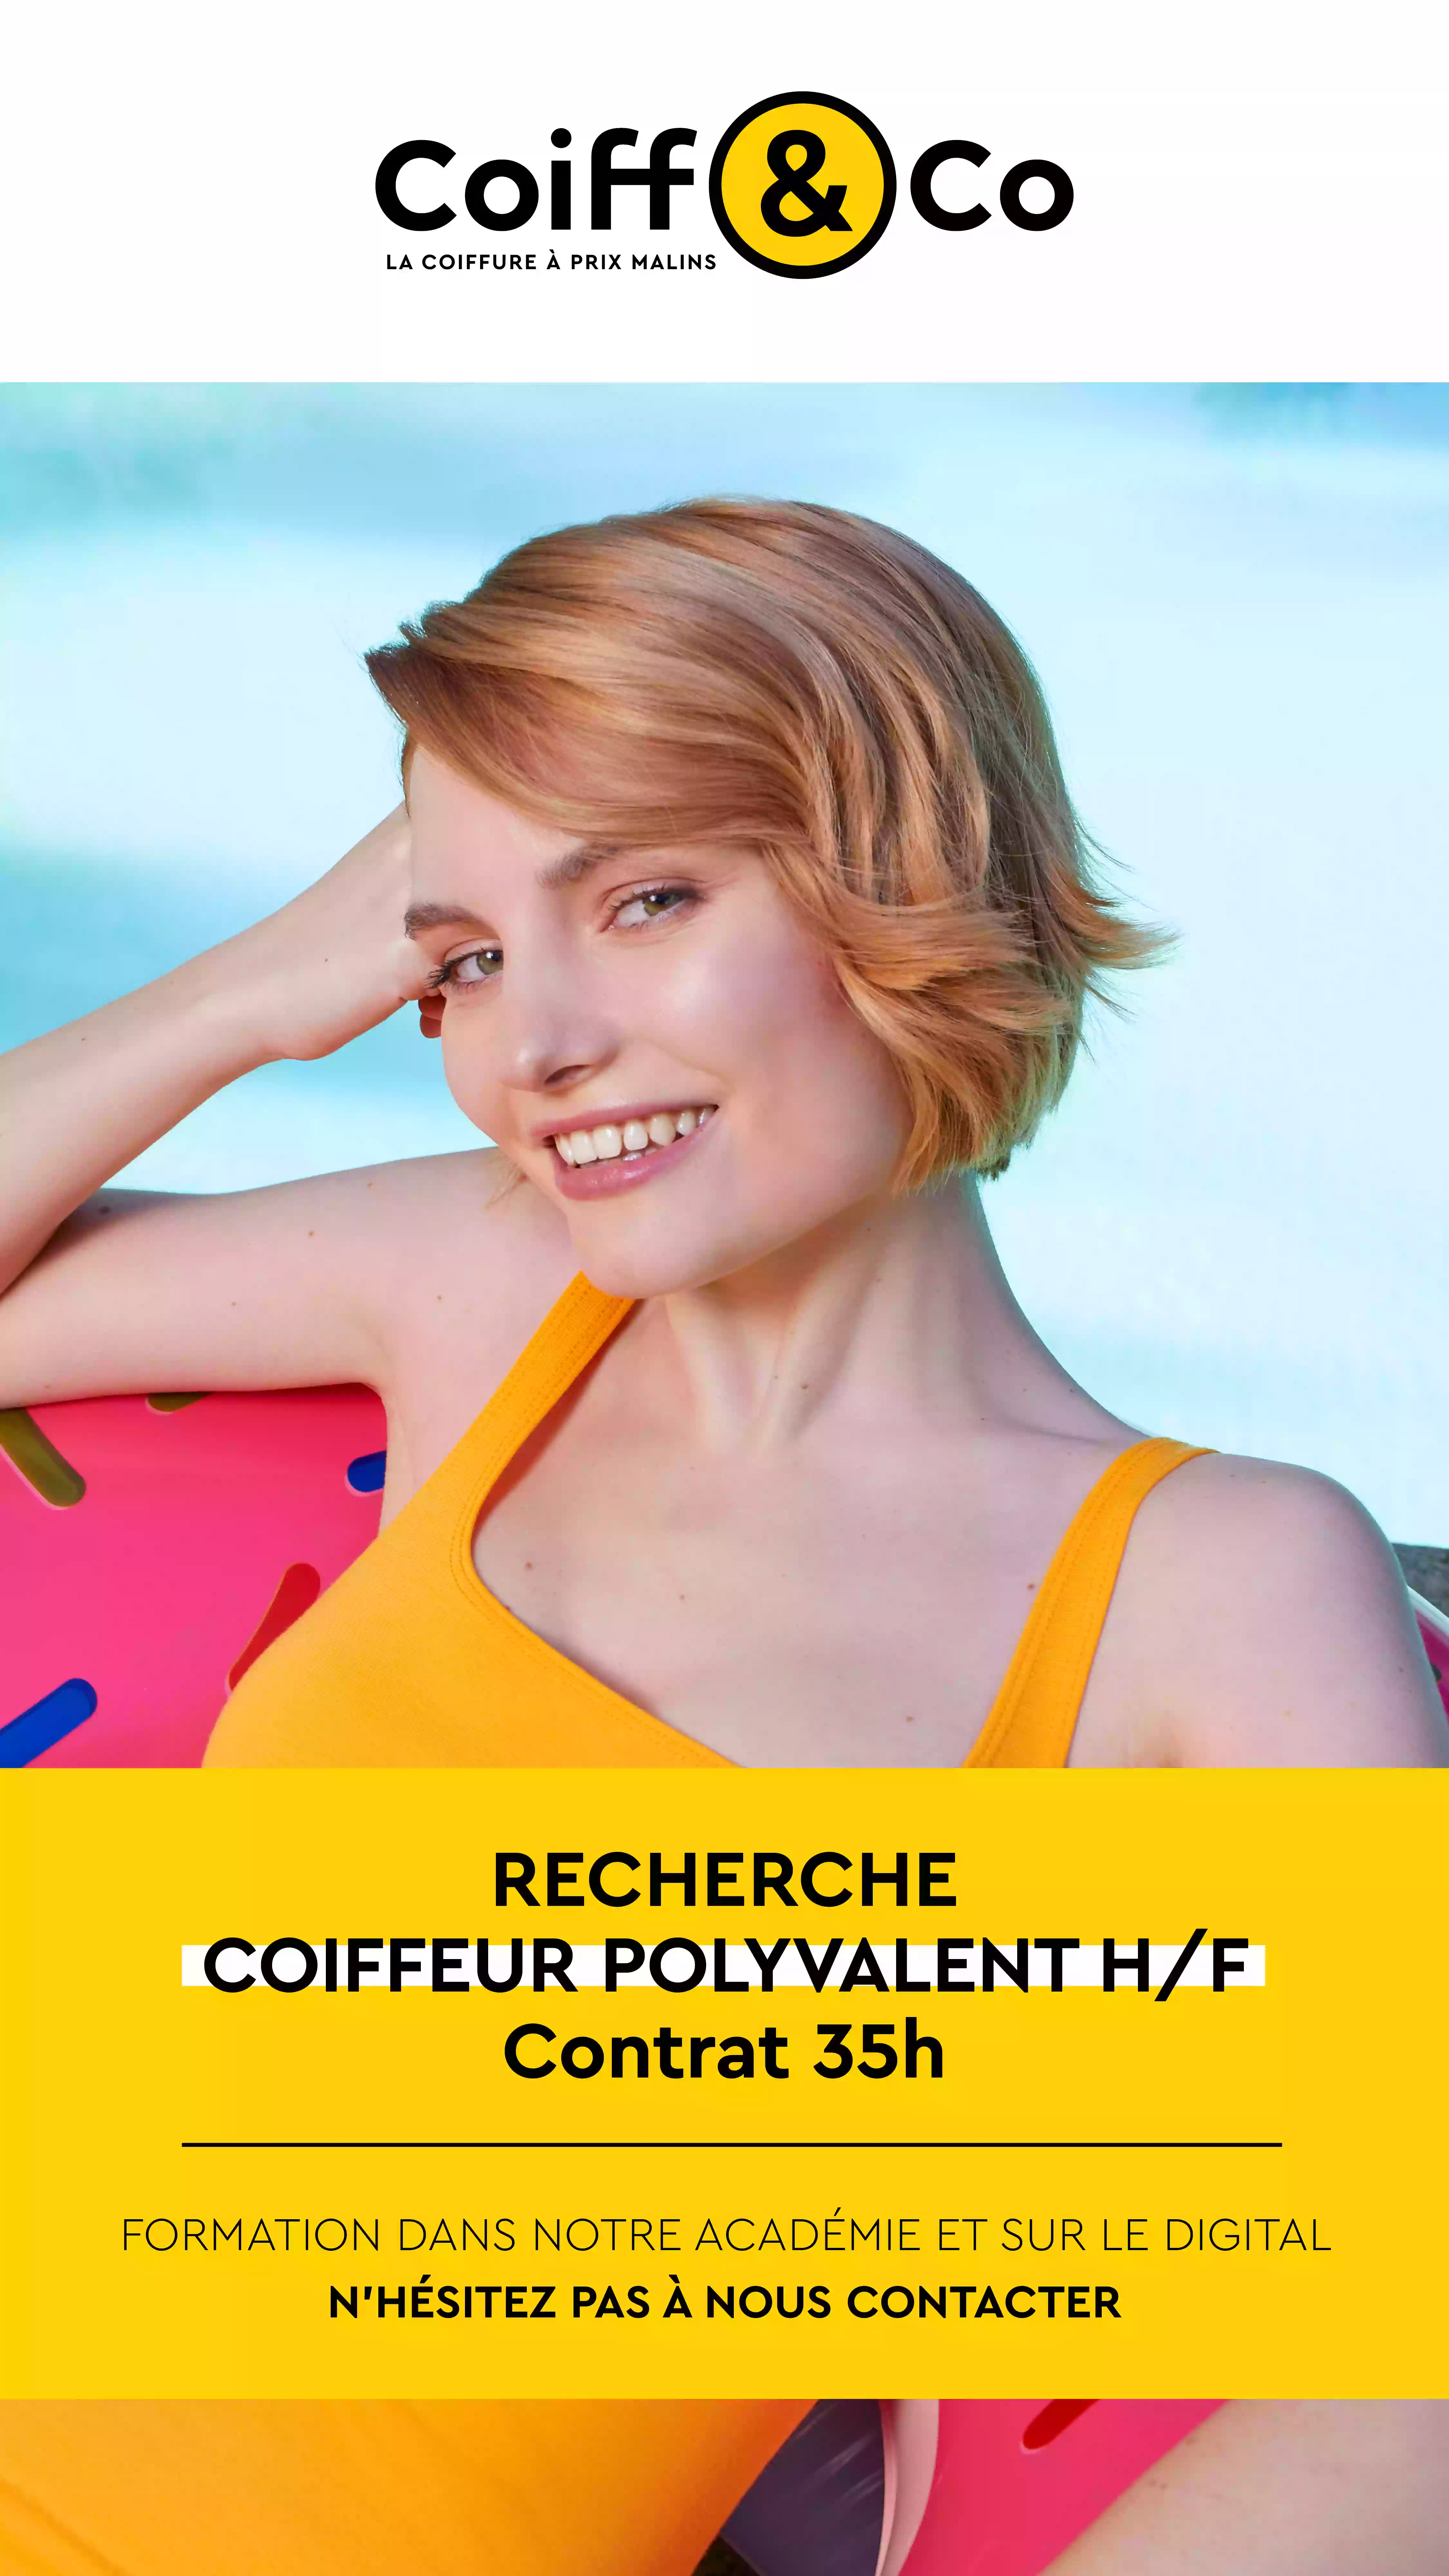 Coiff&Co - Chantepie